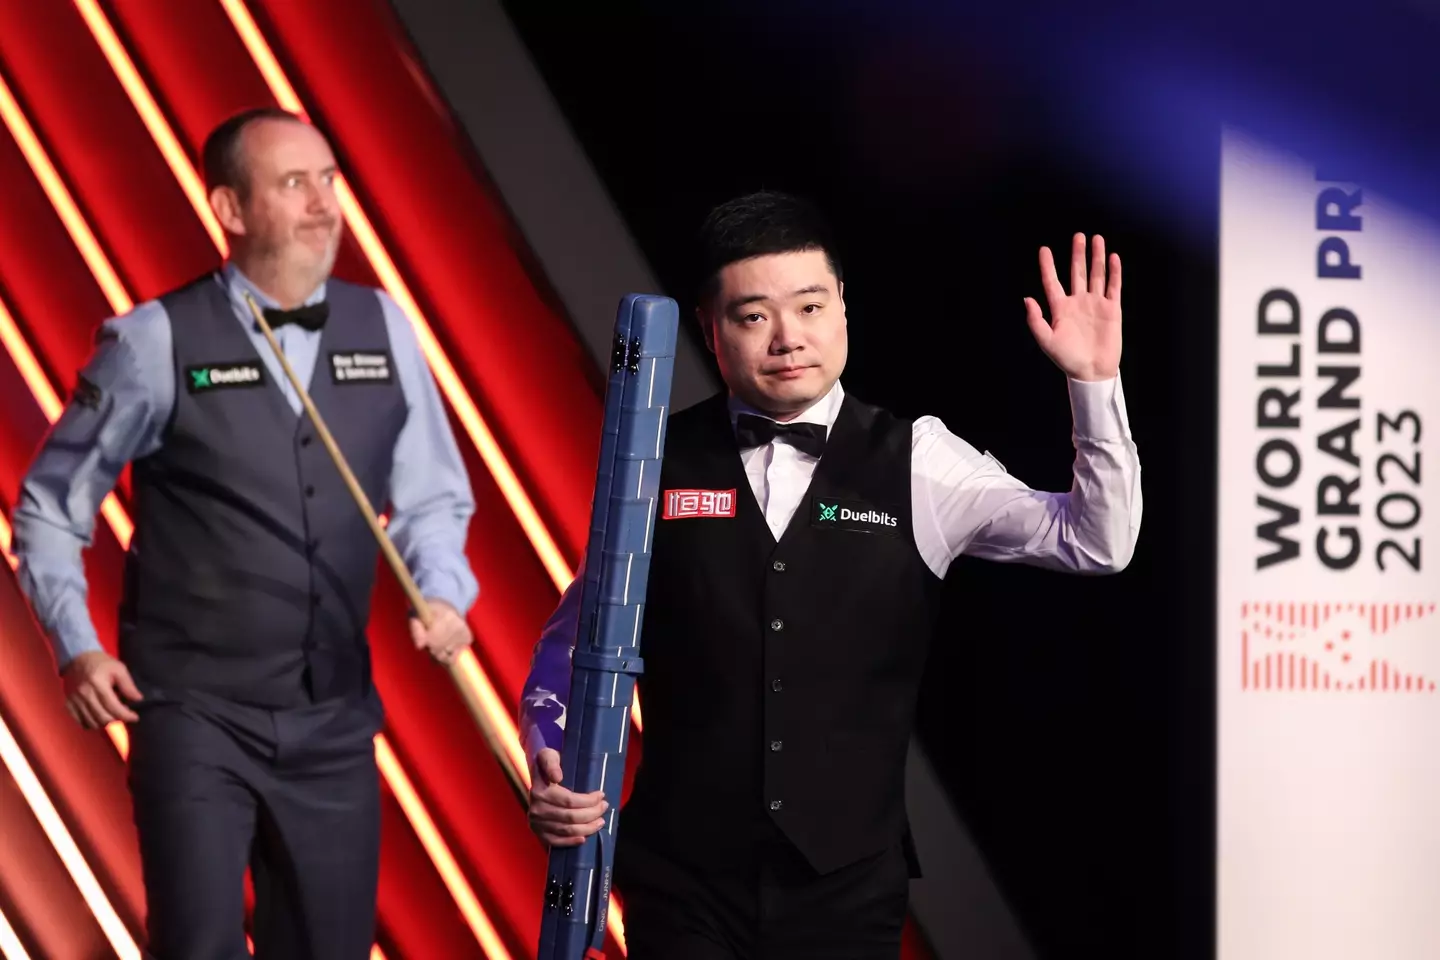 Ding Junhui beat Mark Williams after they set a new record for the most points scored in a frame. (